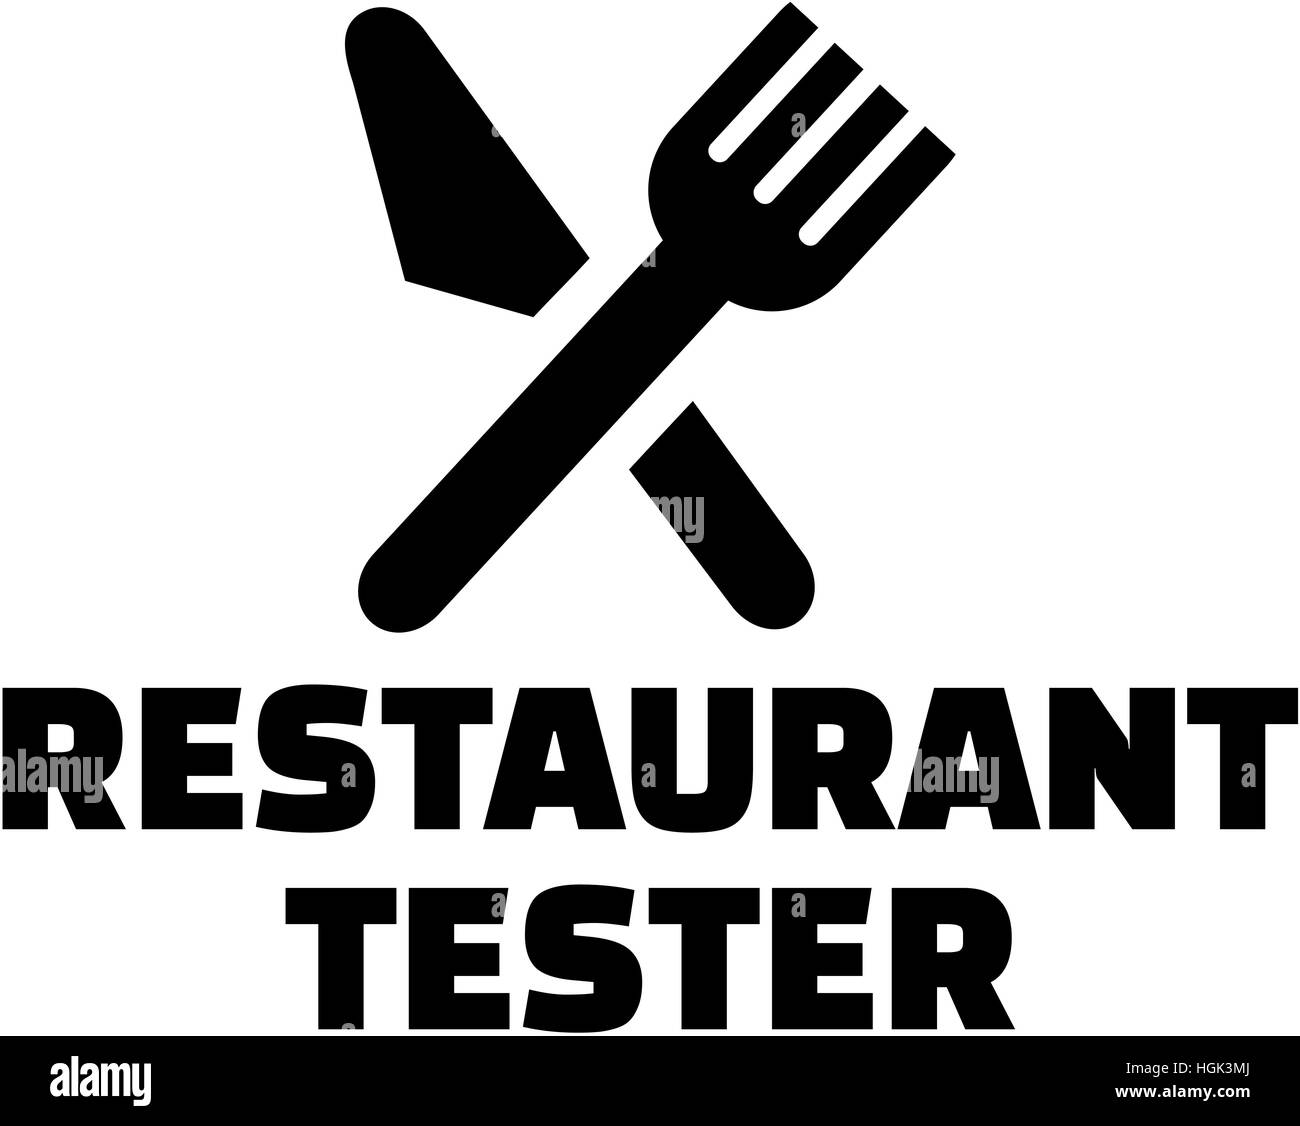 Restaurant Tester with crossed cutlery Stock Photo